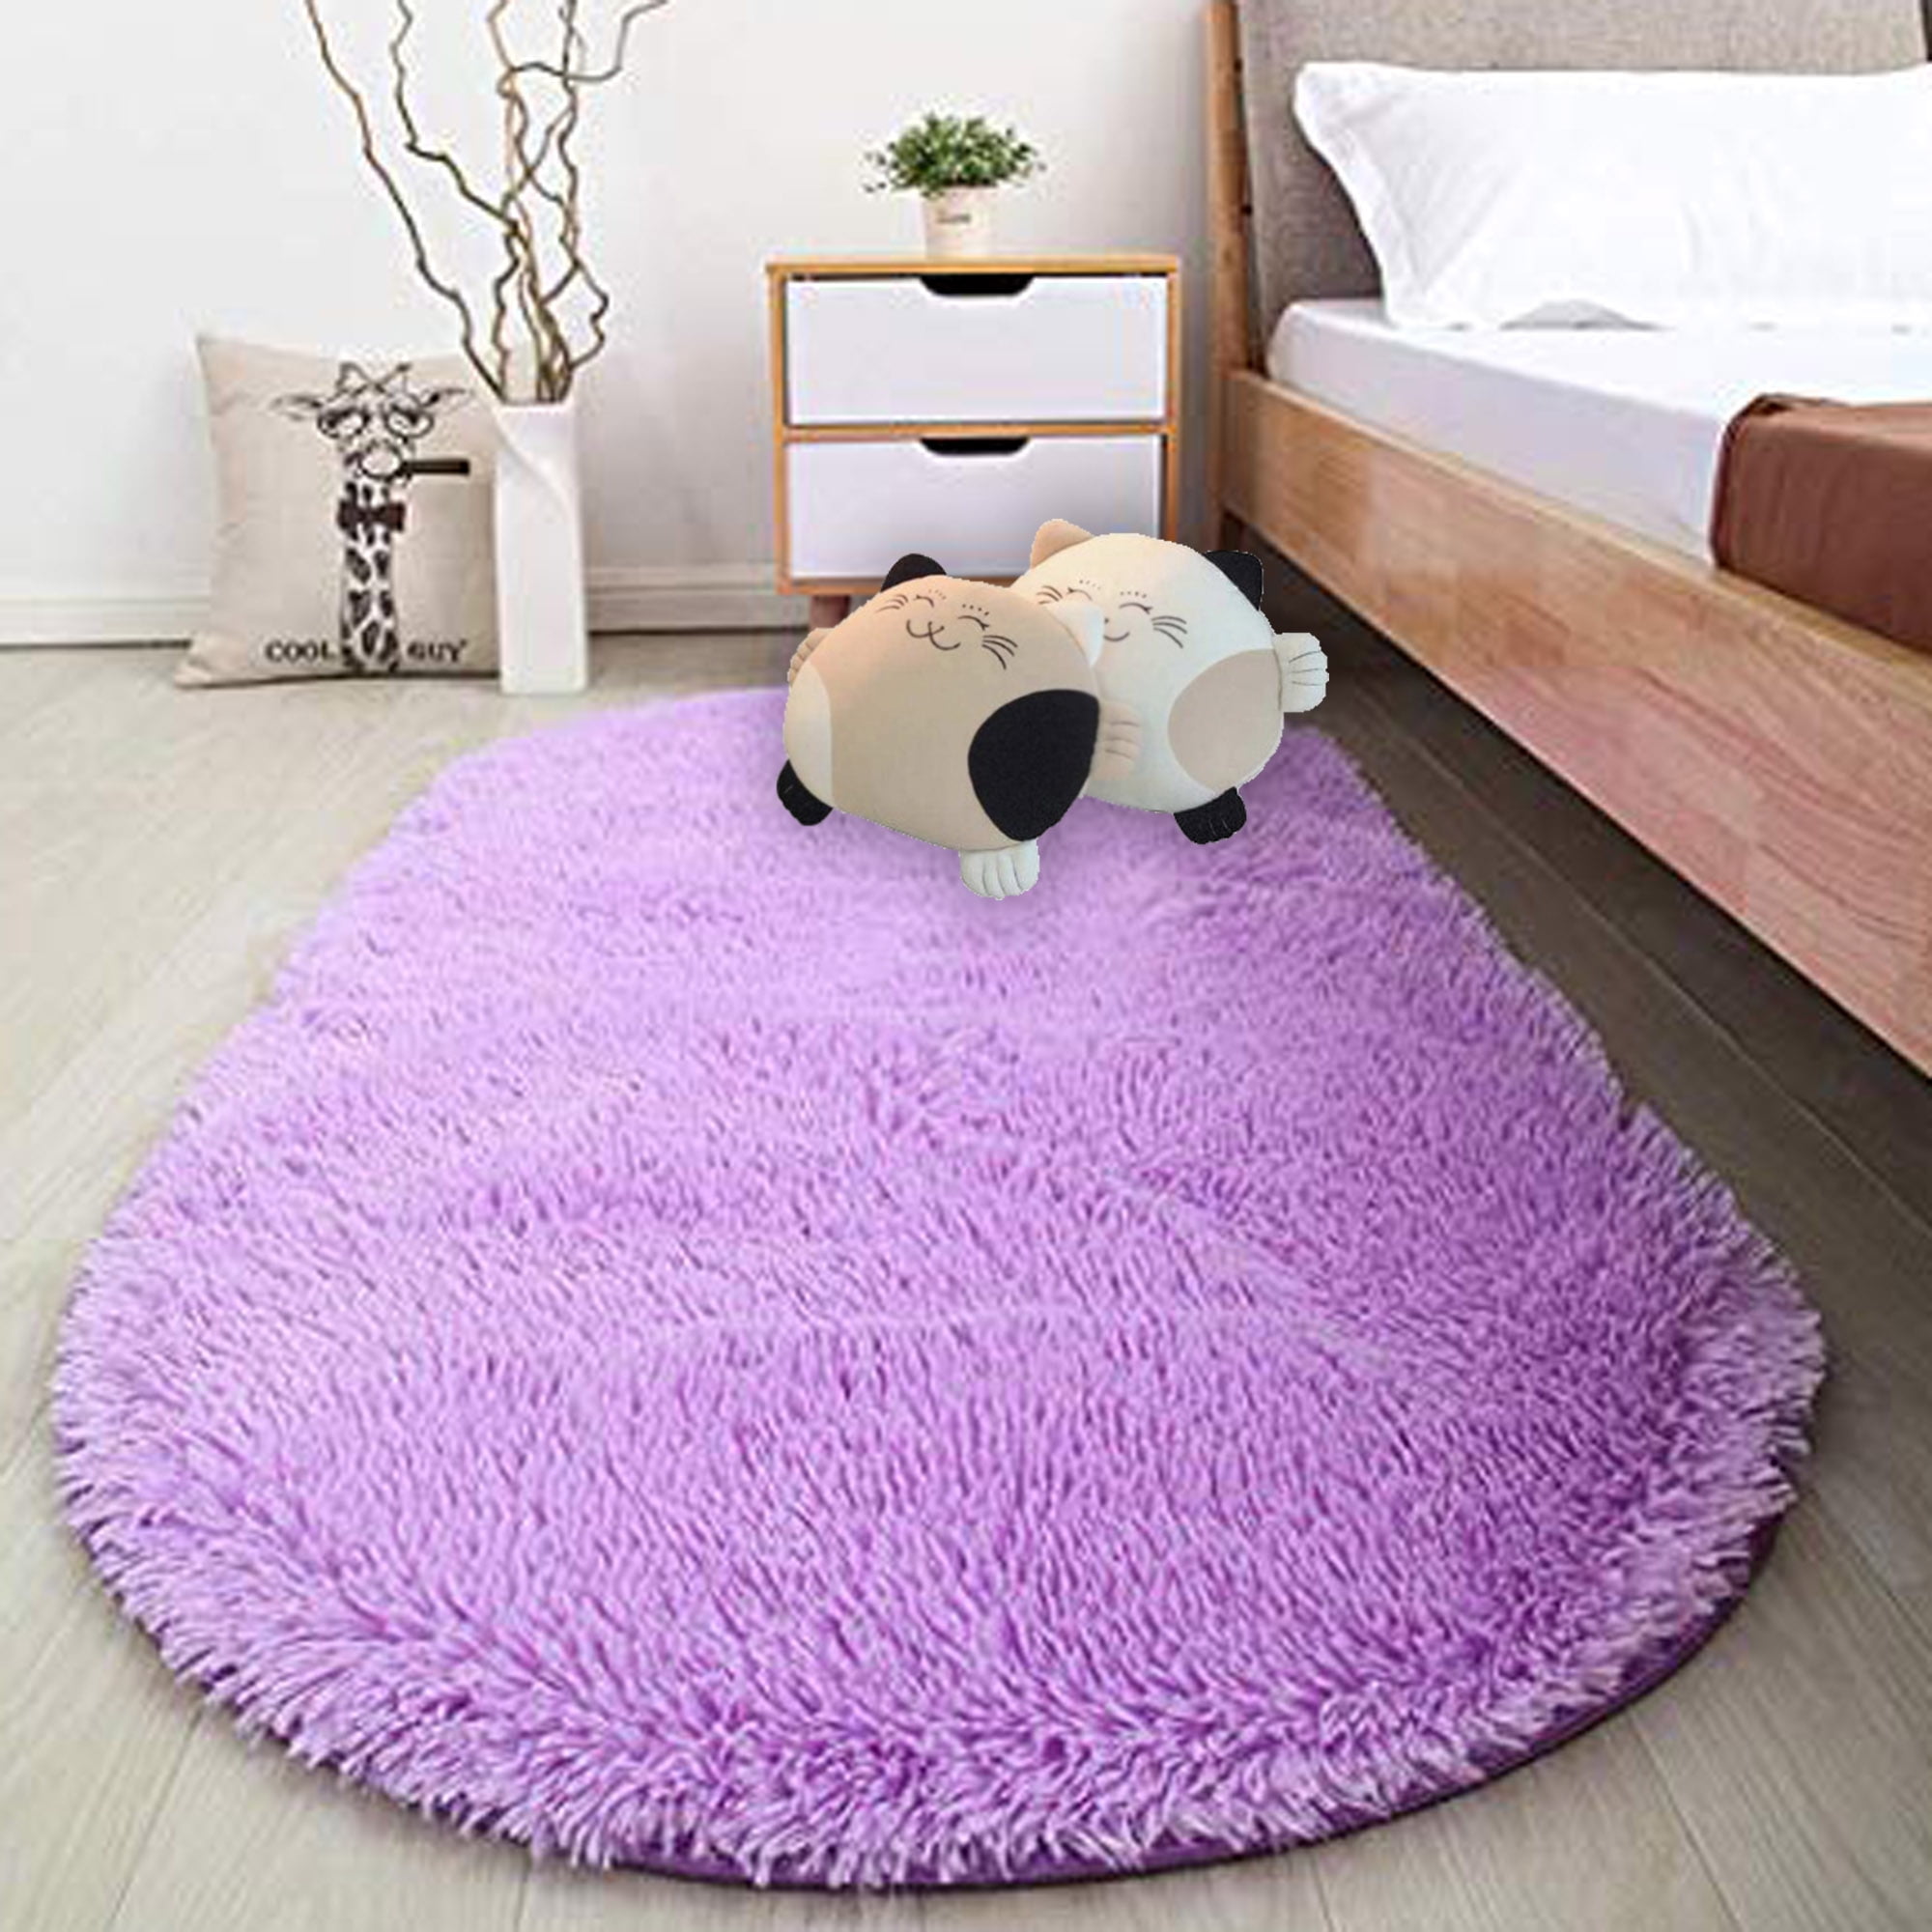 NK 31.4 x 64.9 Super Soft Oval Area Rugs Silky Smooth Bedroom Mats for